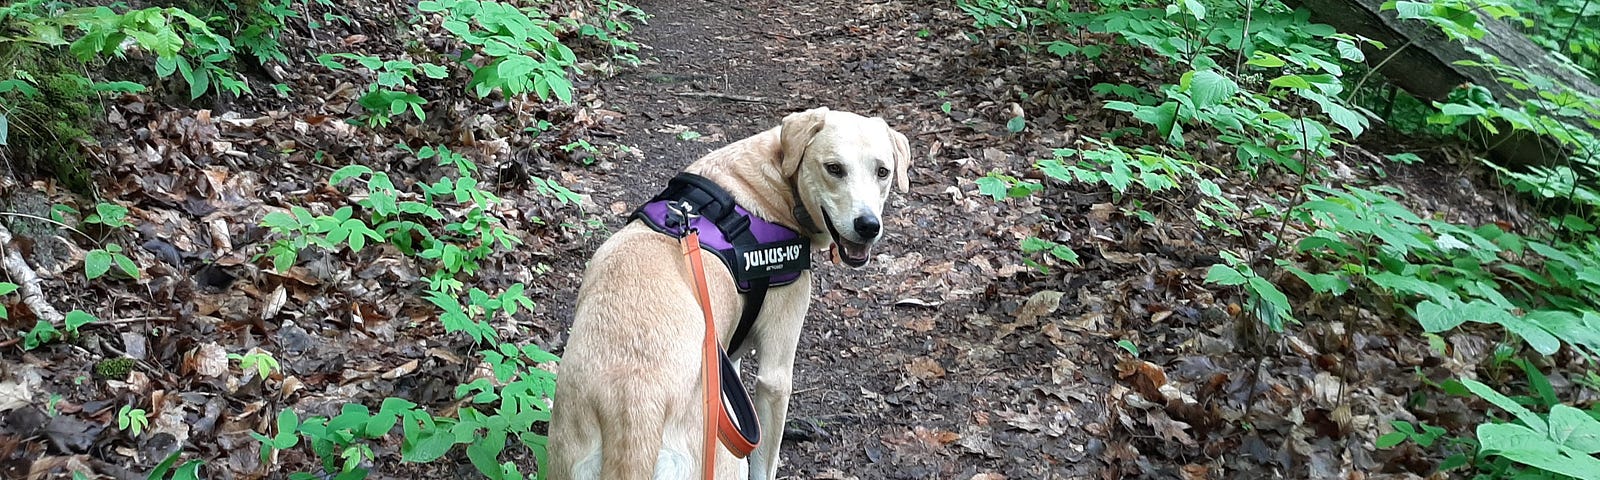 A large, golden dog turning around to smile at the camera while it is standing on a path in the woods.